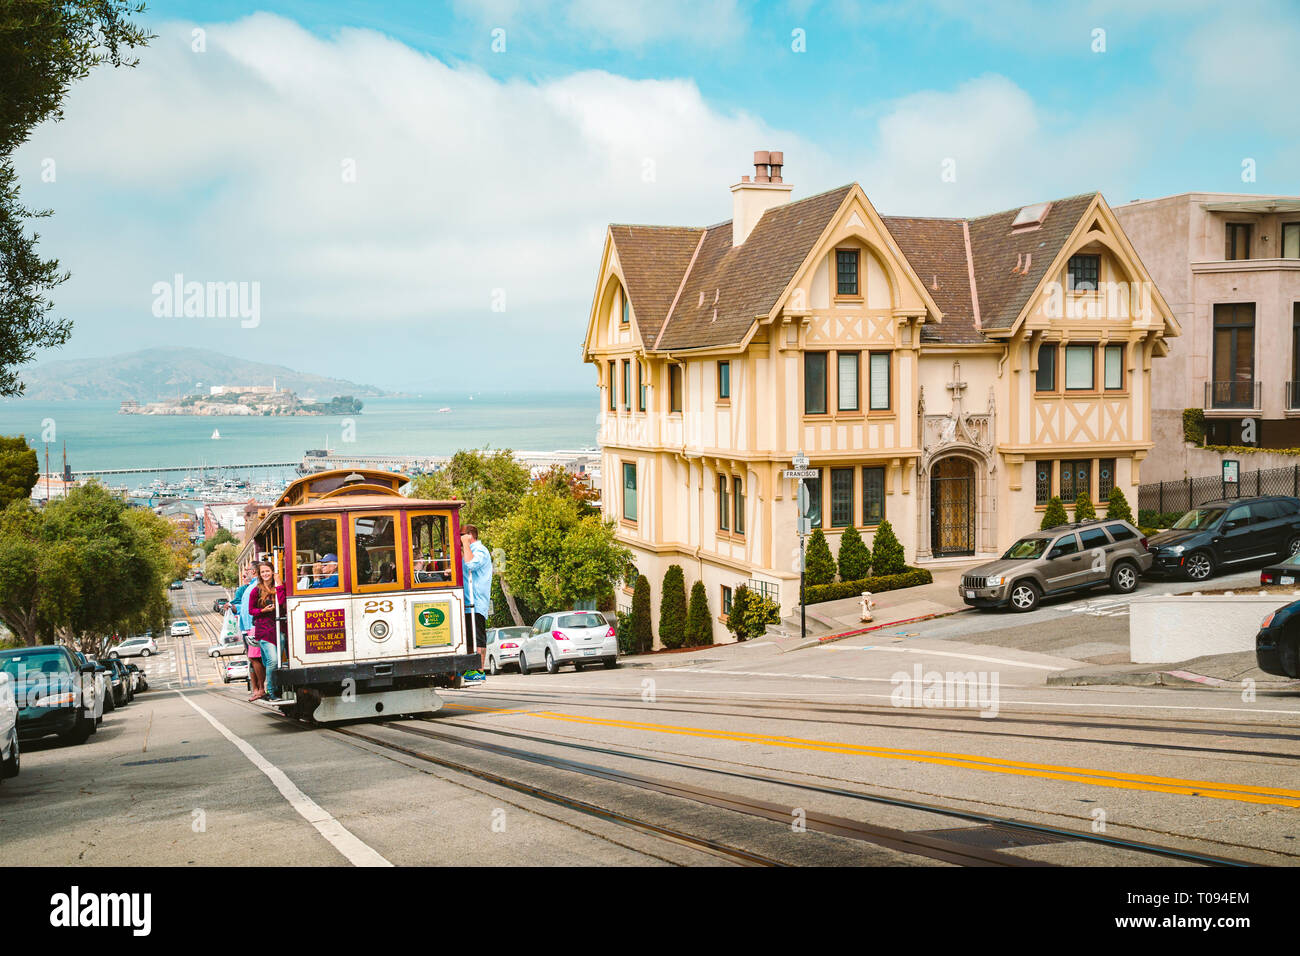 Powell-Hyde cable car climbing up steep hill in central San Francisco with famous Alcatraz Island in the background on a sunny day with blue sky, USA Stock Photo